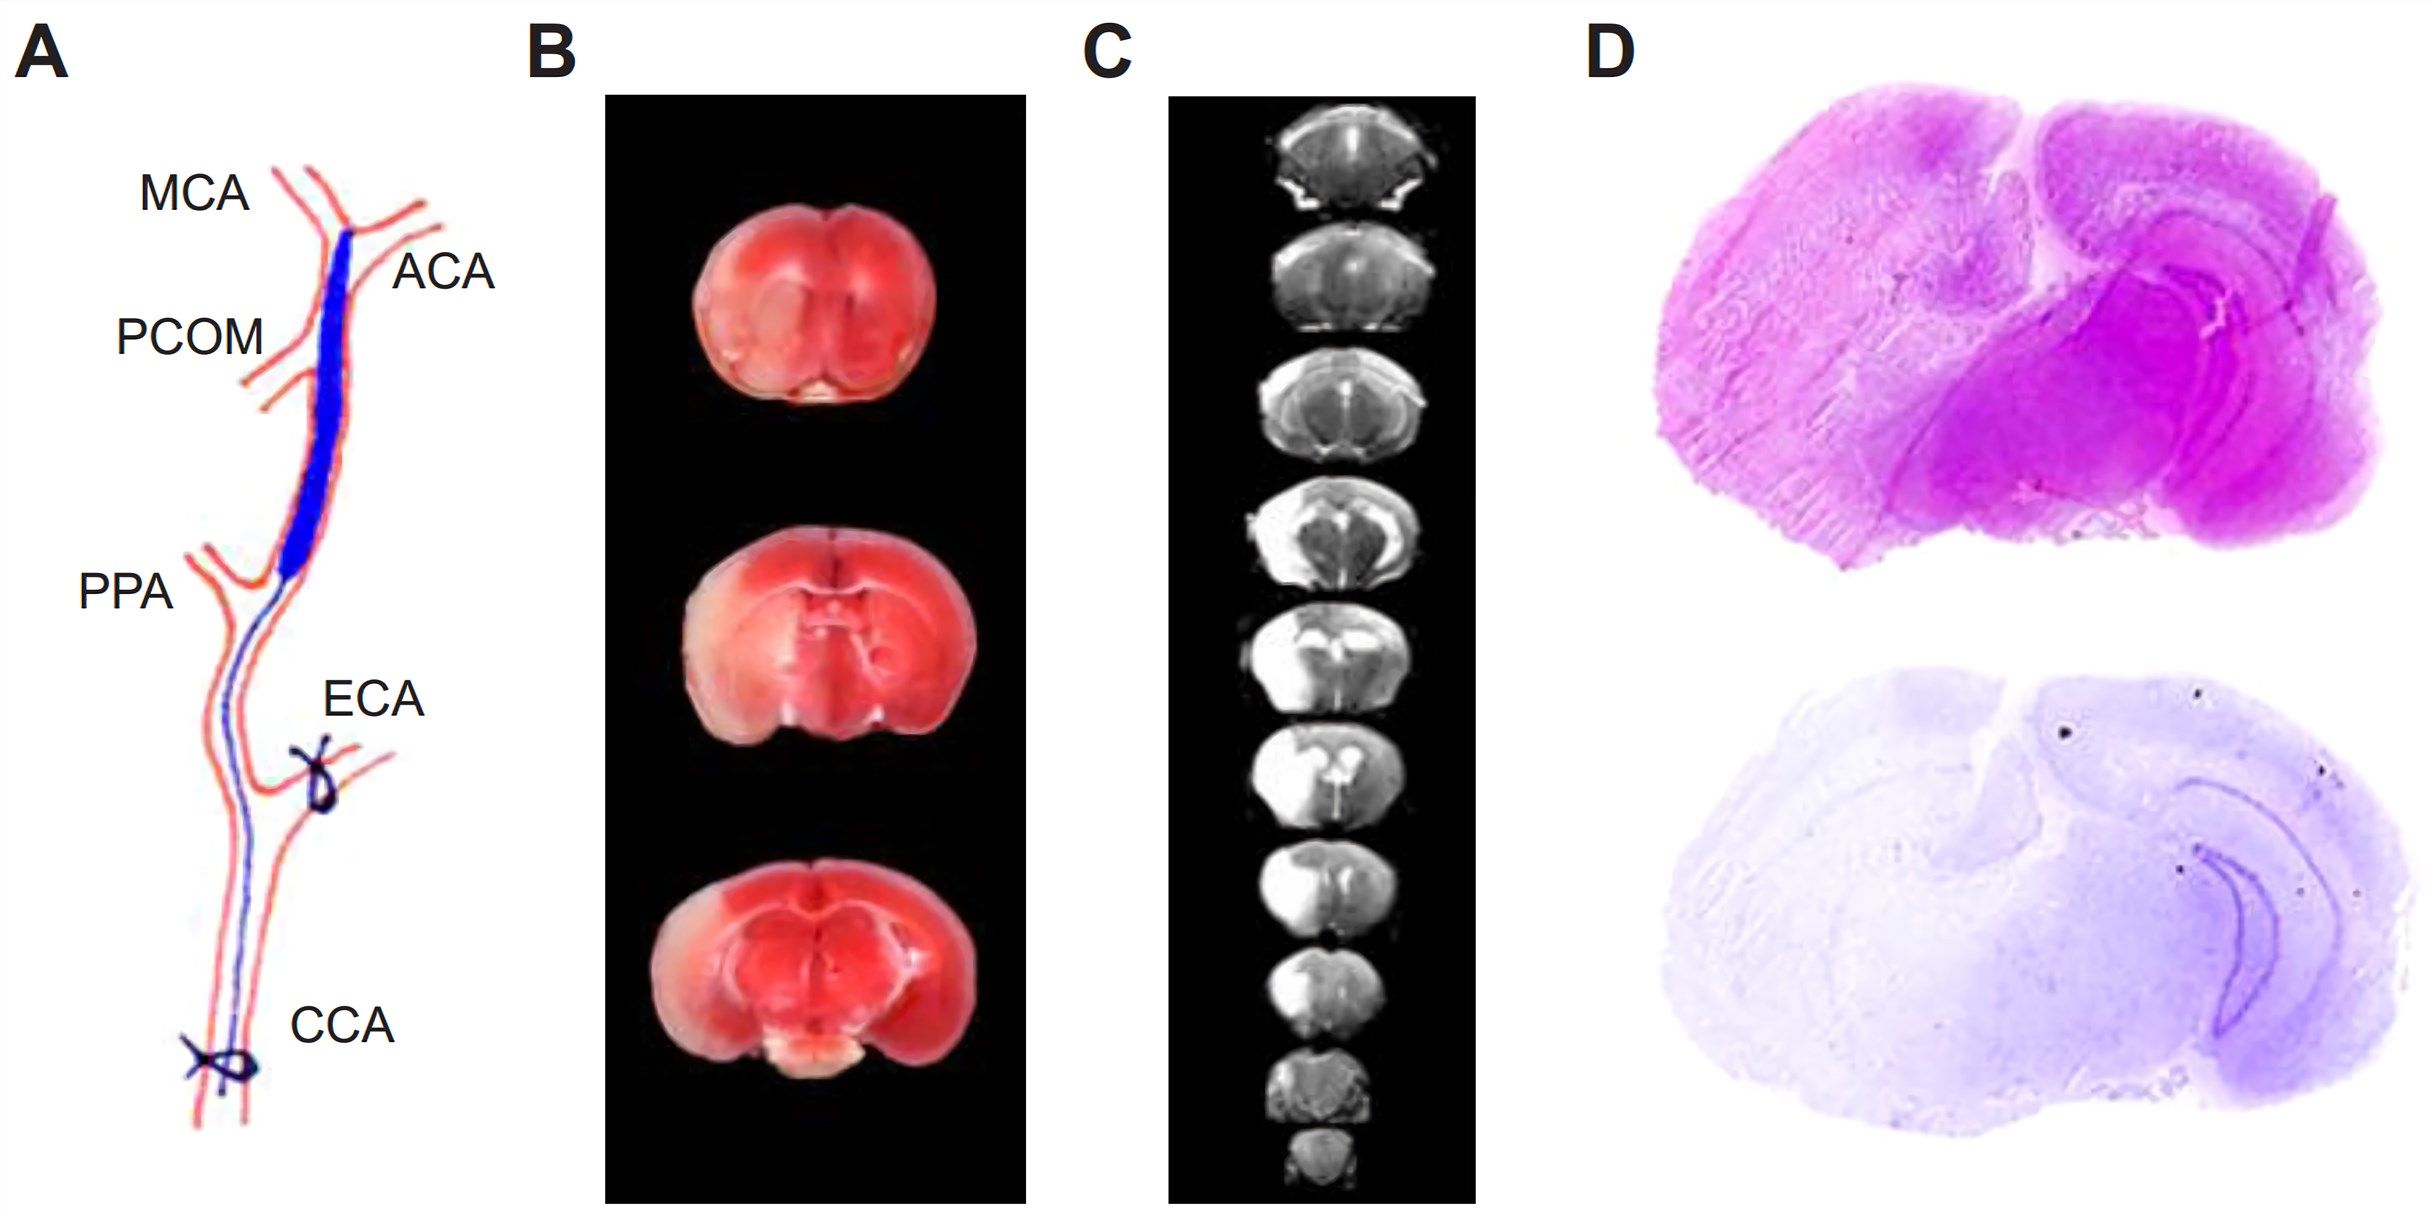 Middle Cerebral Artery Occlusion (MCAO) Rodent Model of Stoke & Brain Ischemia